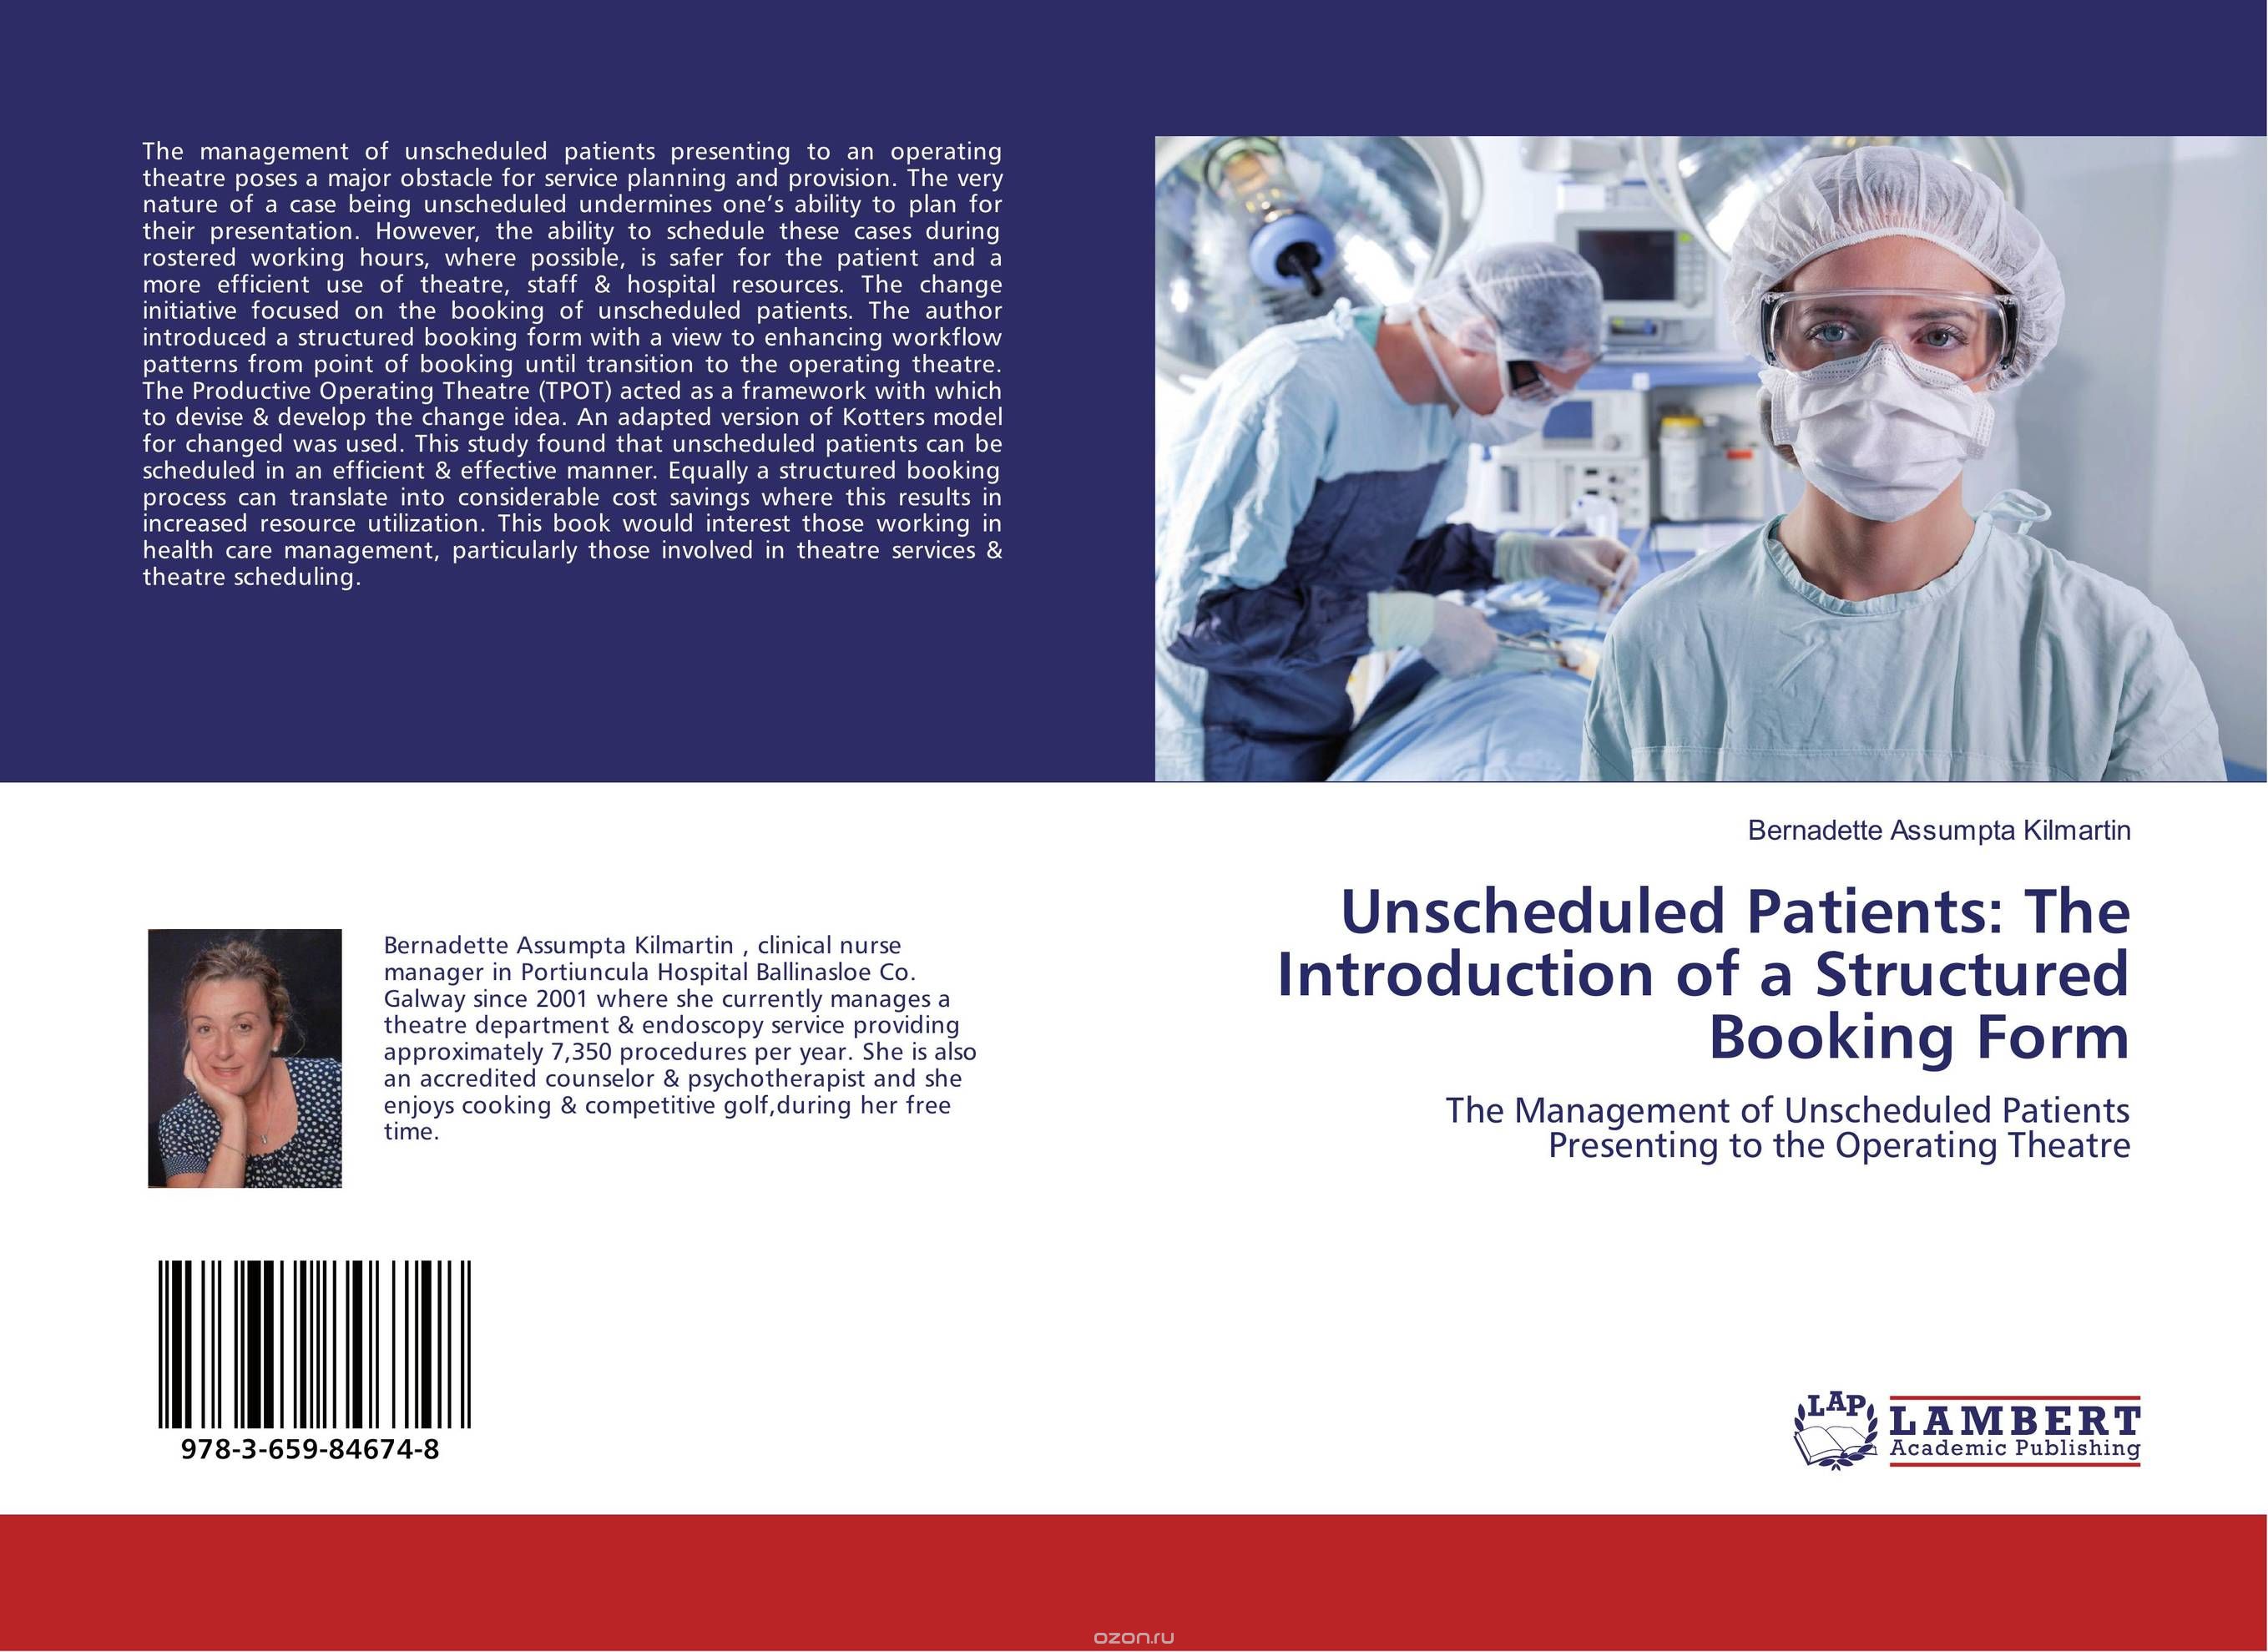 Unscheduled Patients: The Introduction of a Structured Booking Form